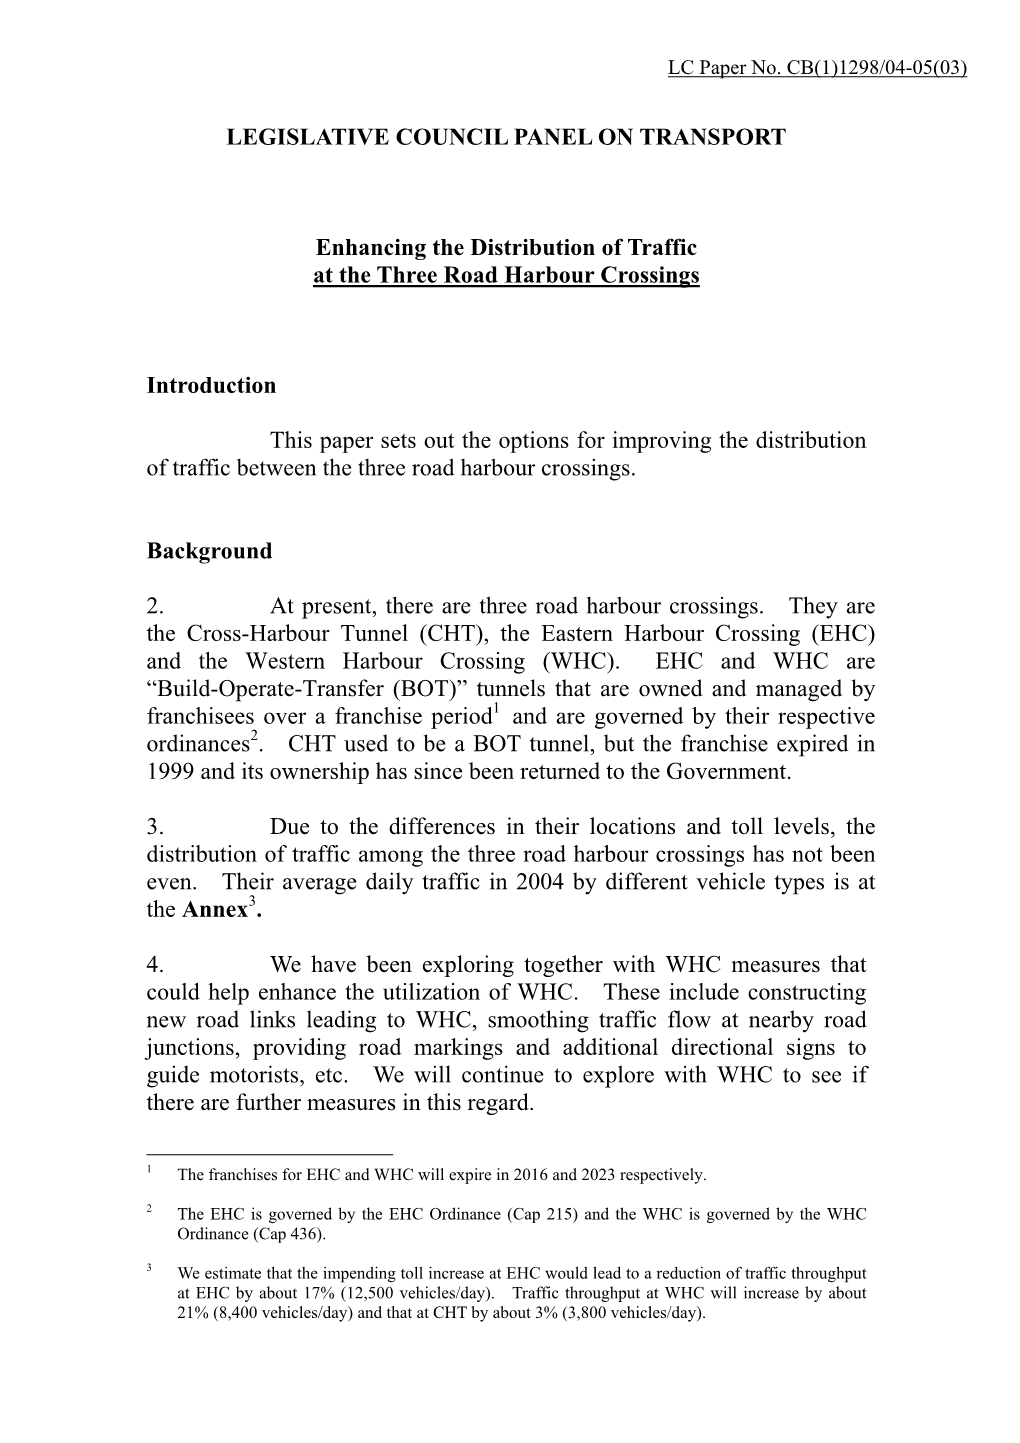 Enhancing the Distribution of Traffic at the Three Road Harbour Crossings